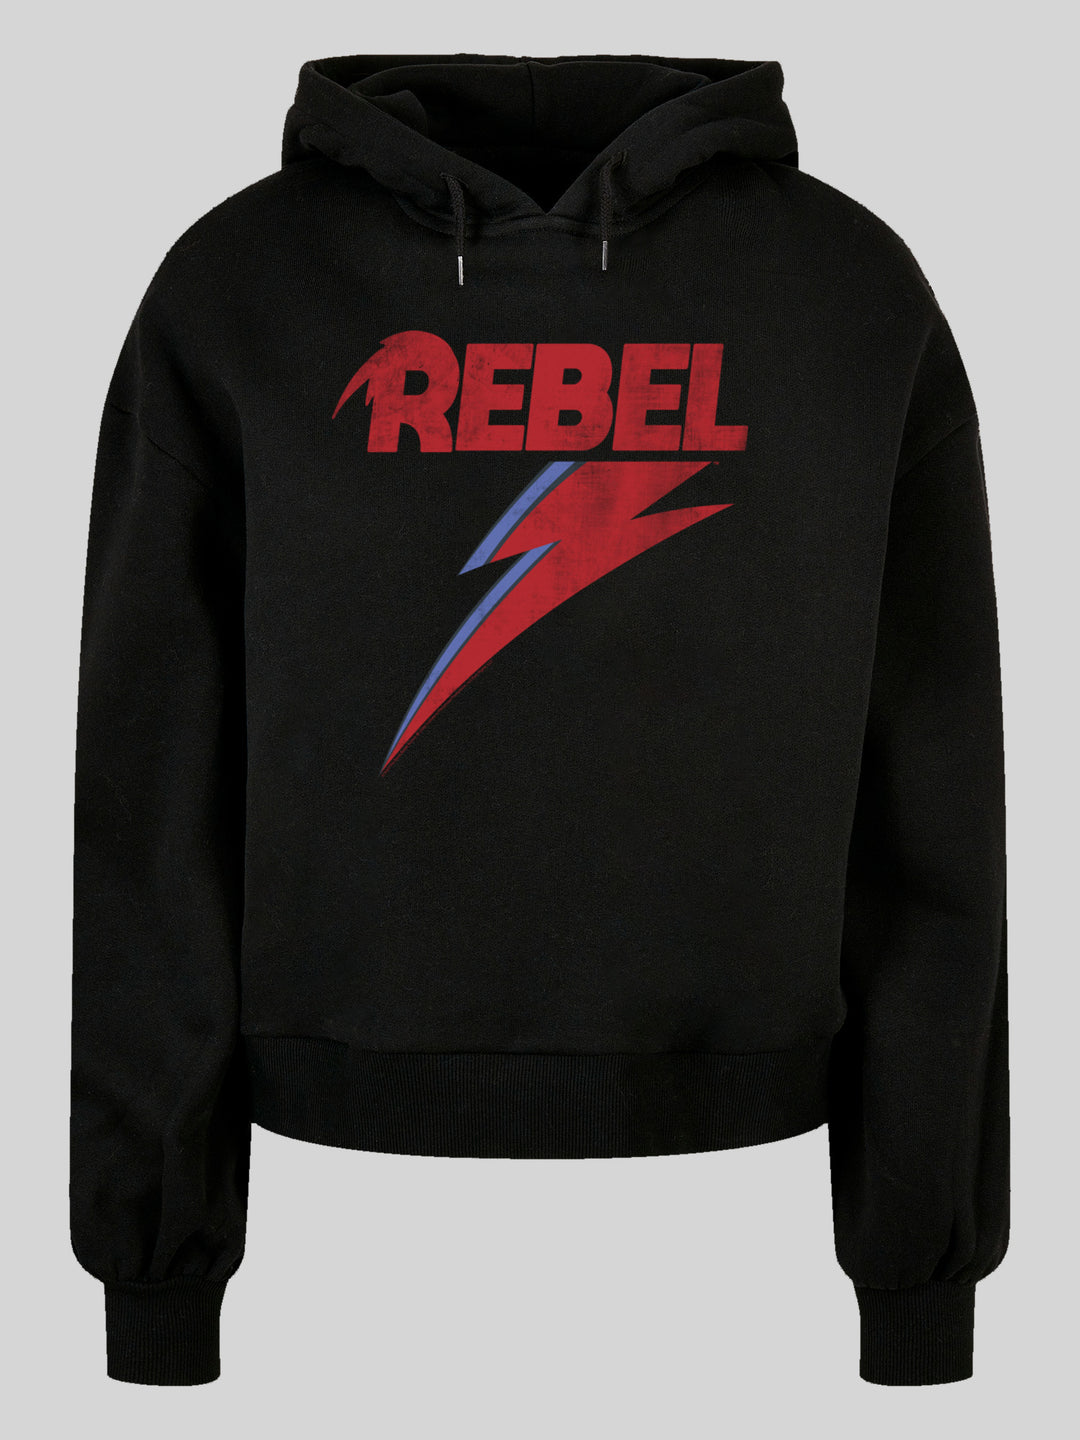 David Bowie Distressed Rebel with Ladies Organic Oversized Hoody